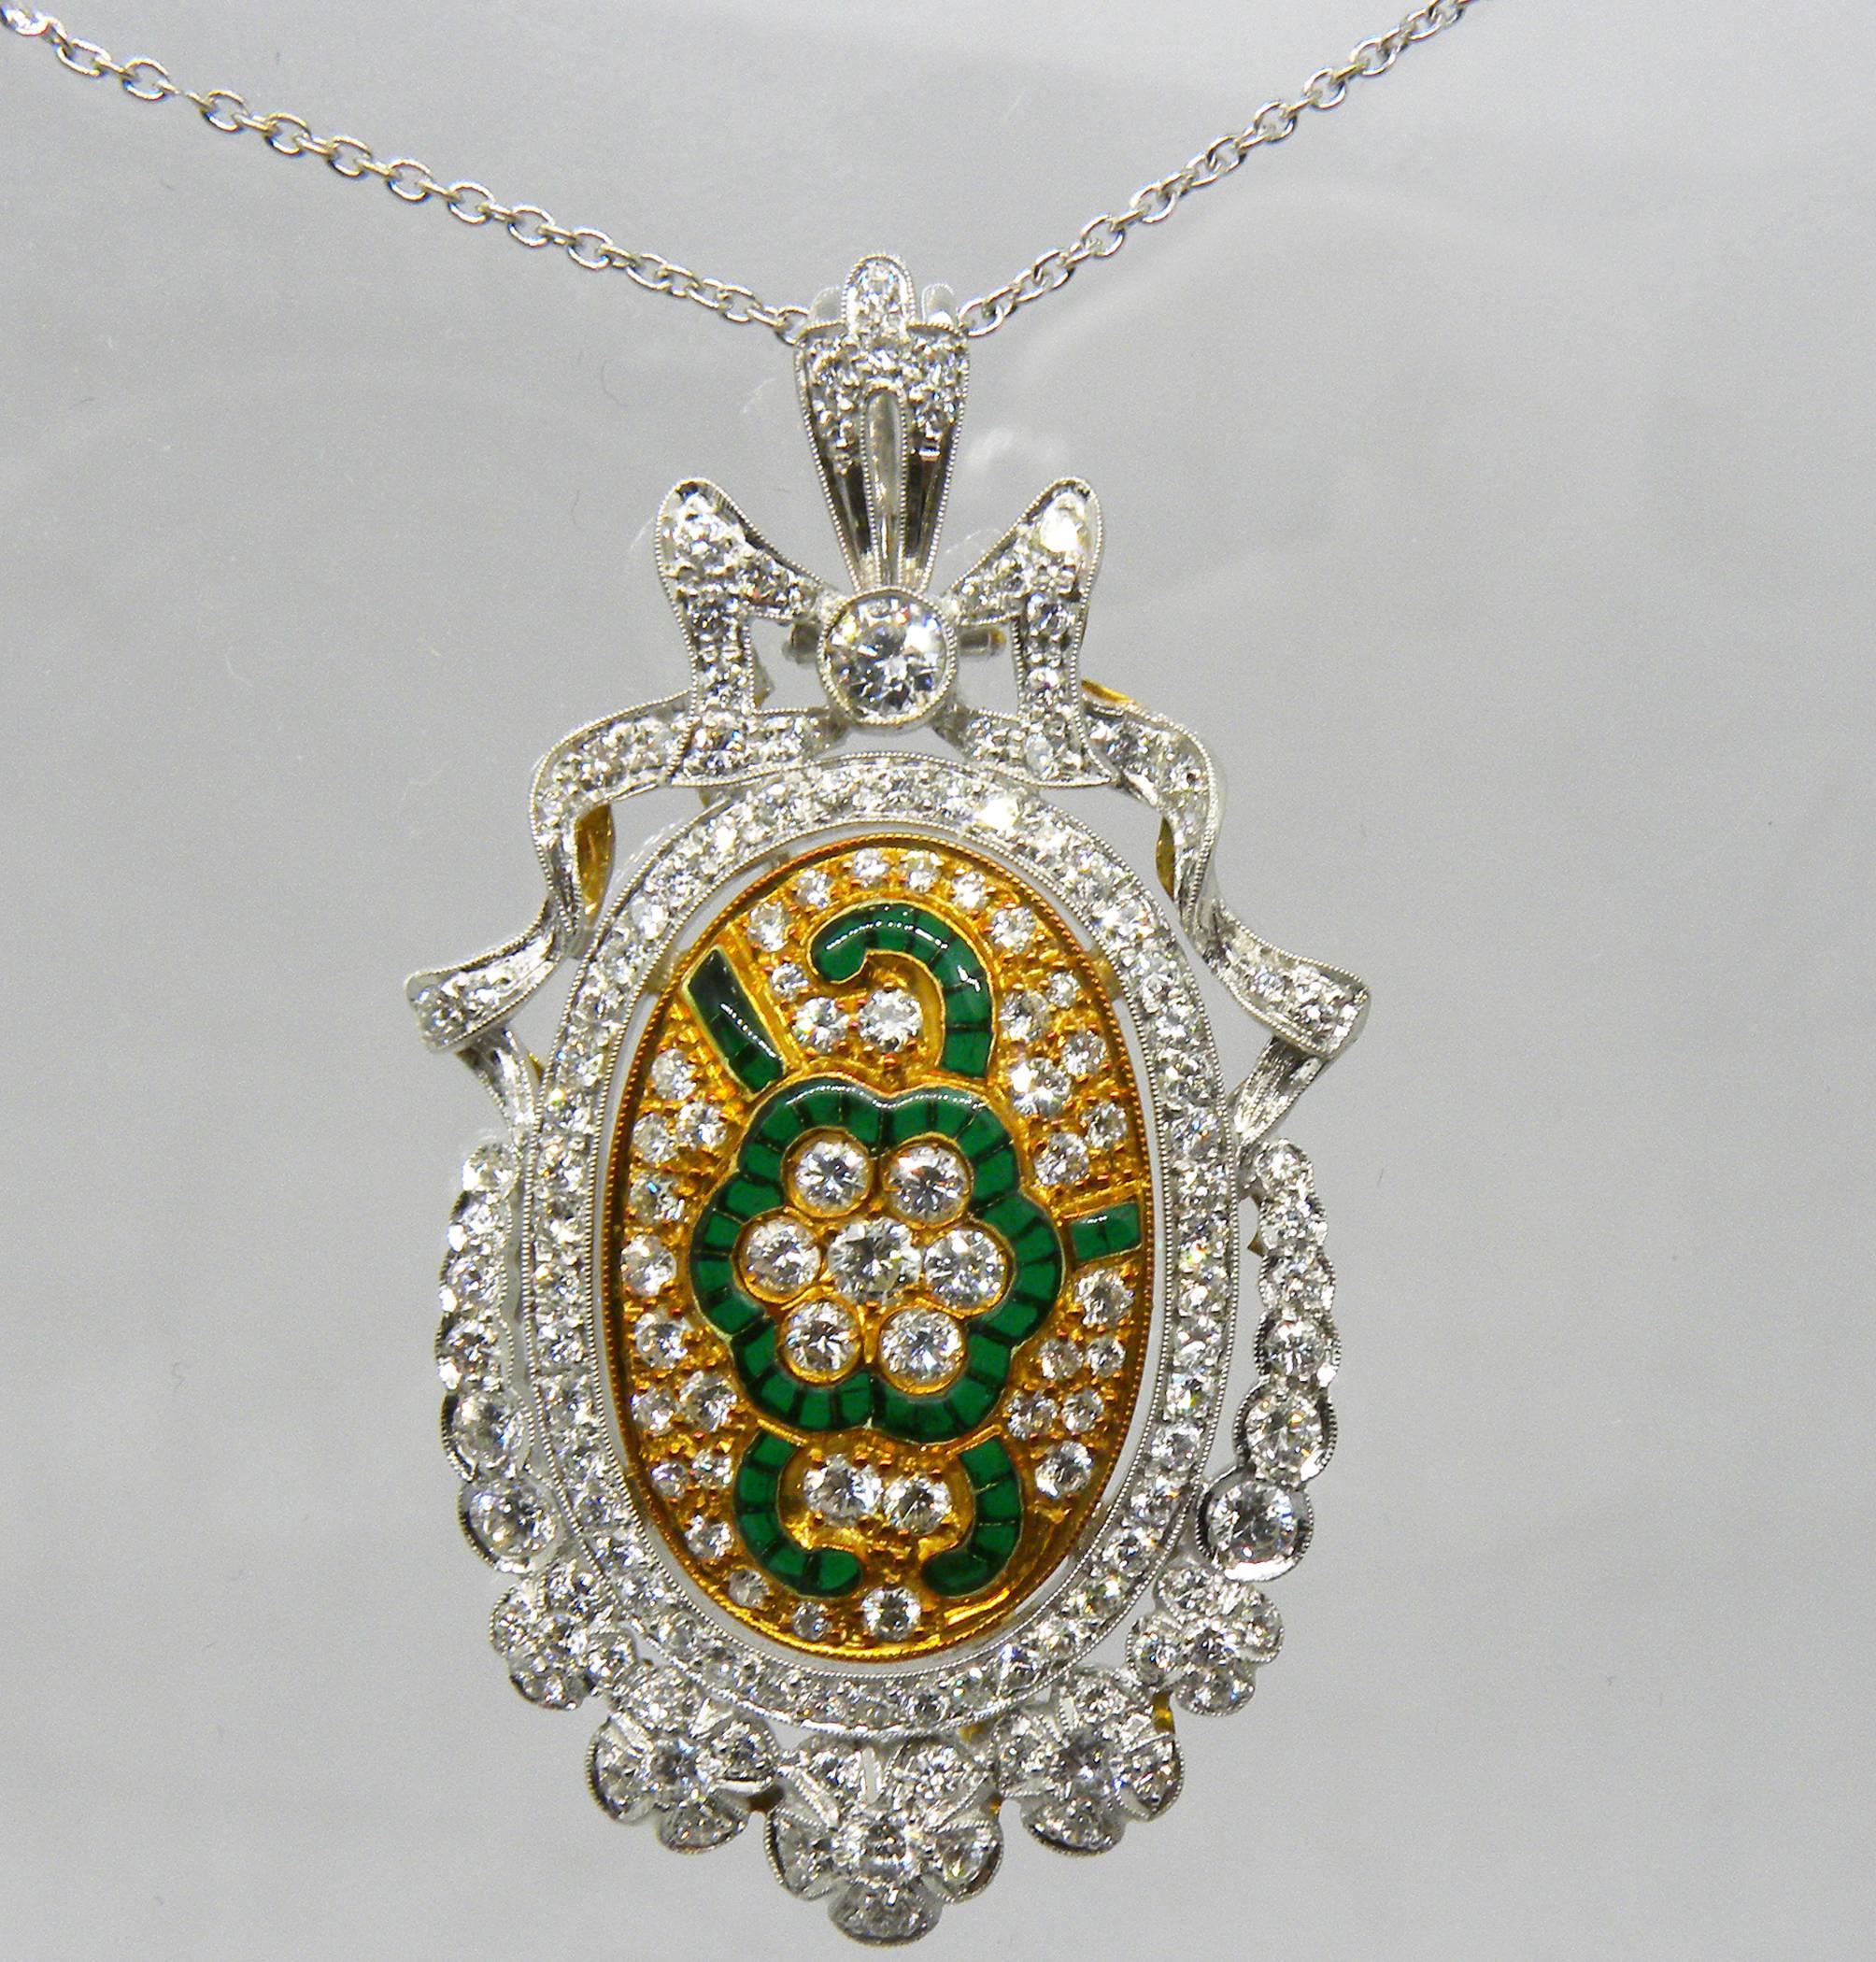 Stunning Art Nouveau style Brooch(it may be worn as a pendant as well): almost 2 Carat Top Quality White Diamond(1.98, D-E, IF) combined with beautiful green plique à jour enamel, in a white and yellow 18Carat gold completely hand-crafted setting.